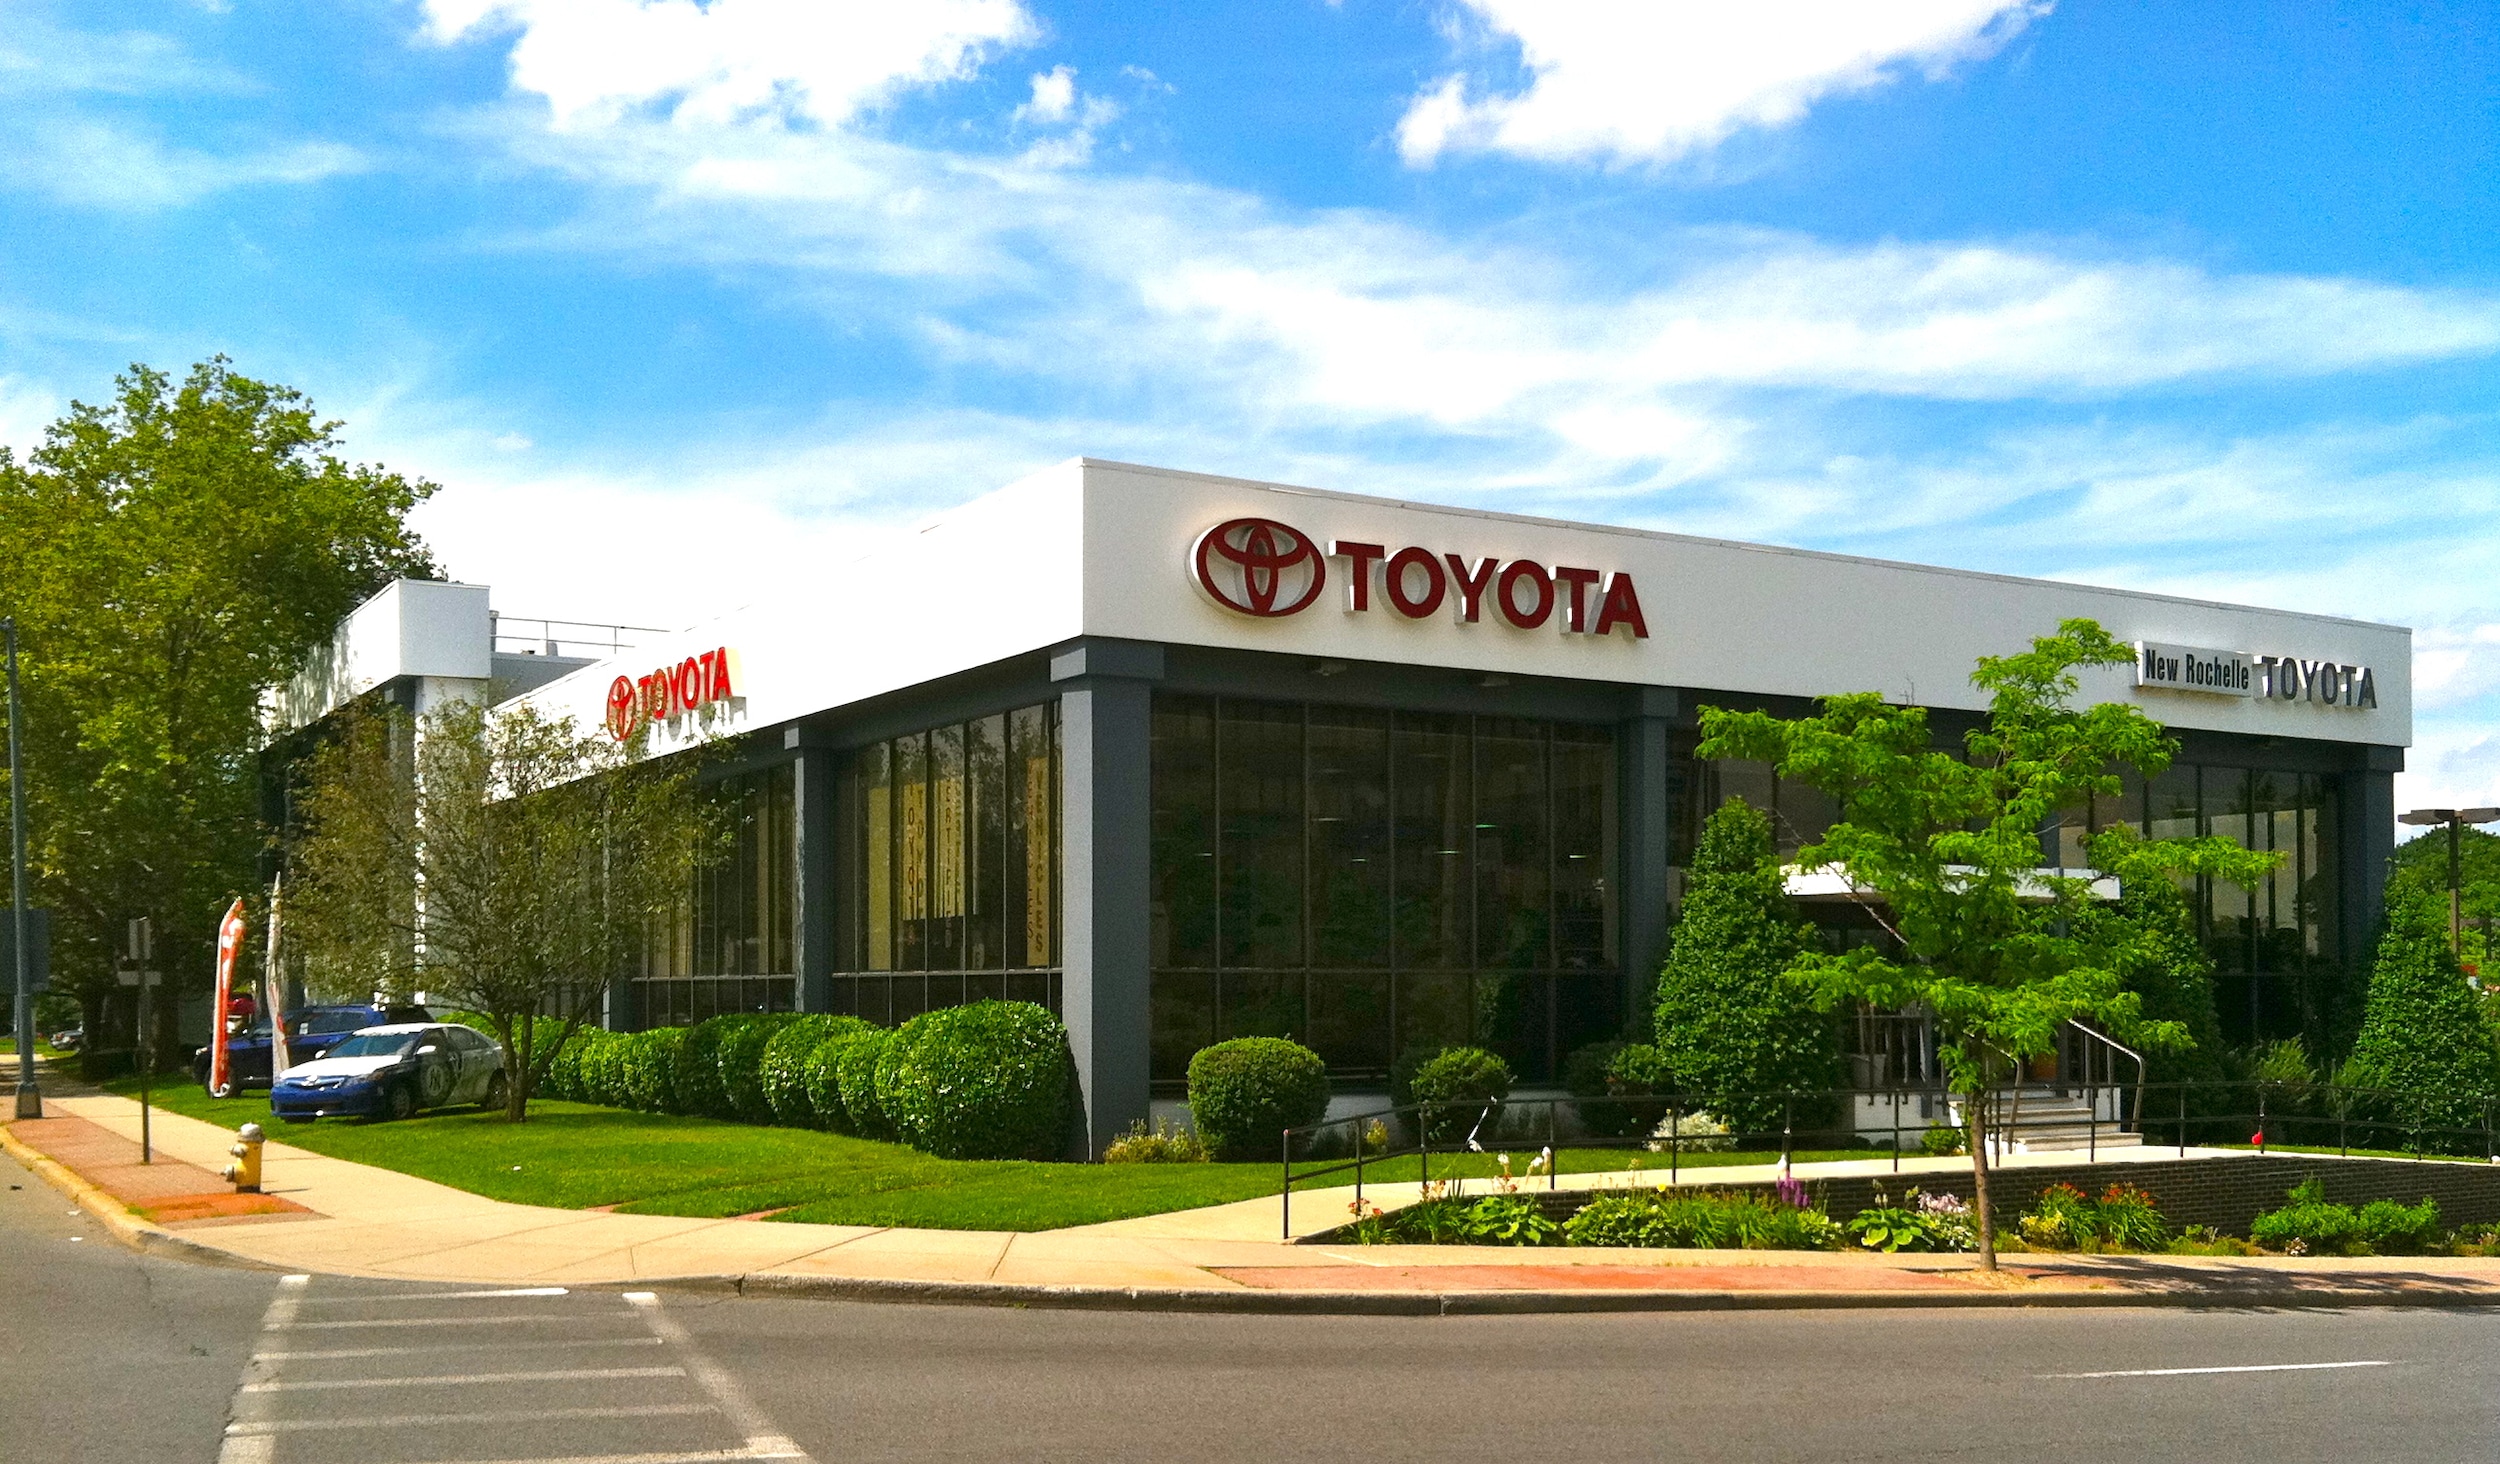 used toyota dealerships in south jersey #1